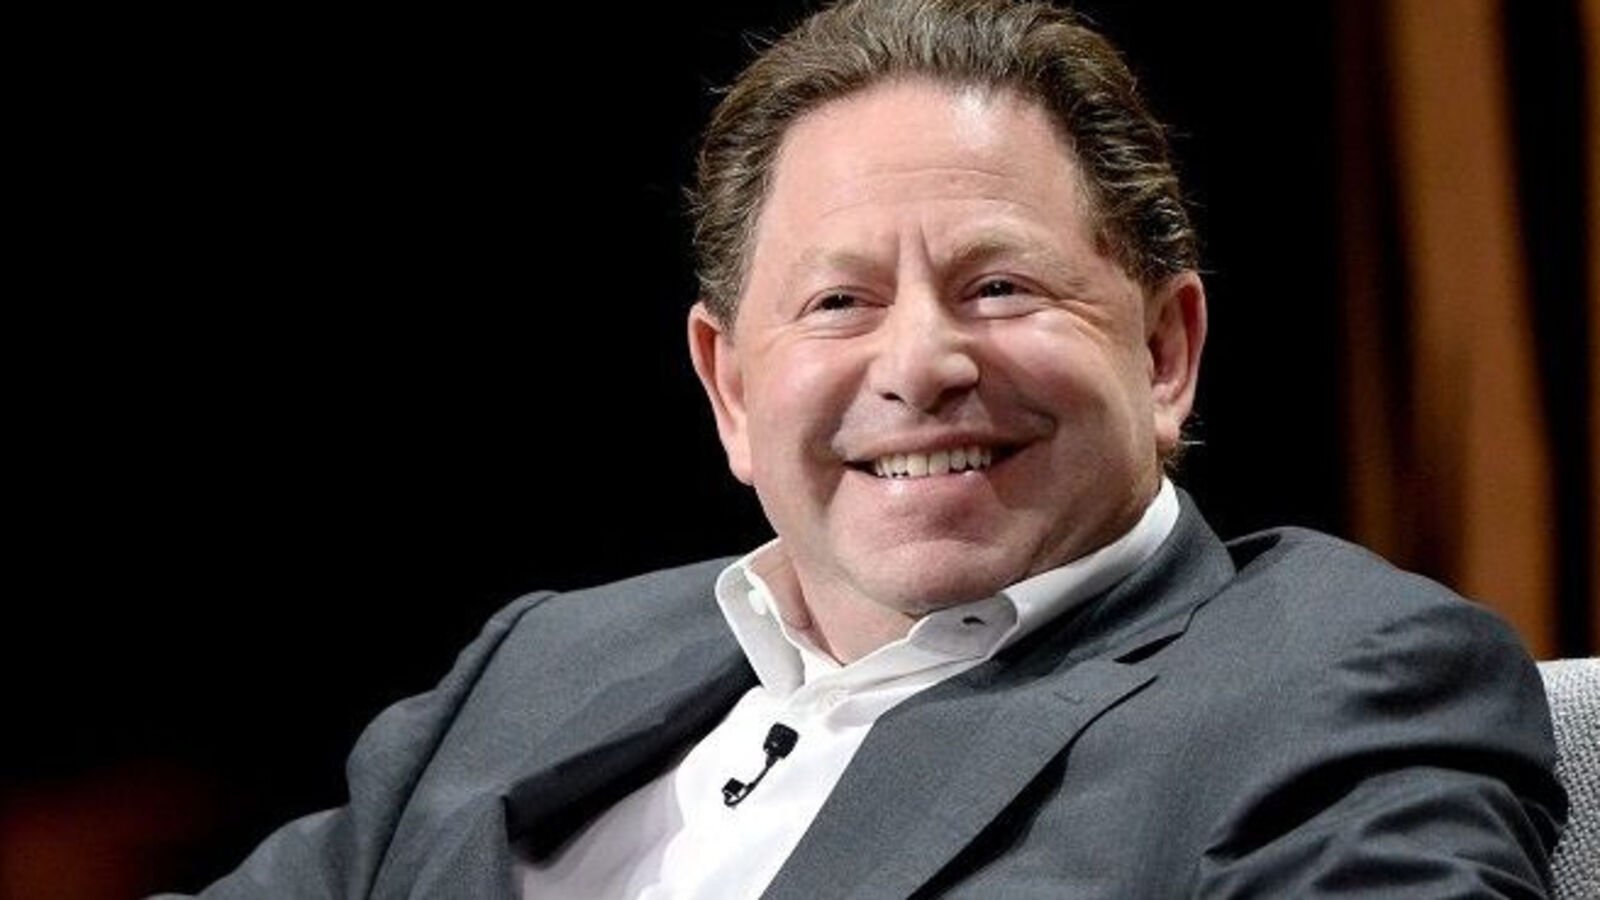 Activision Blizzard boss Bobby Kotick expected to leave once Microsoft deal closes - report